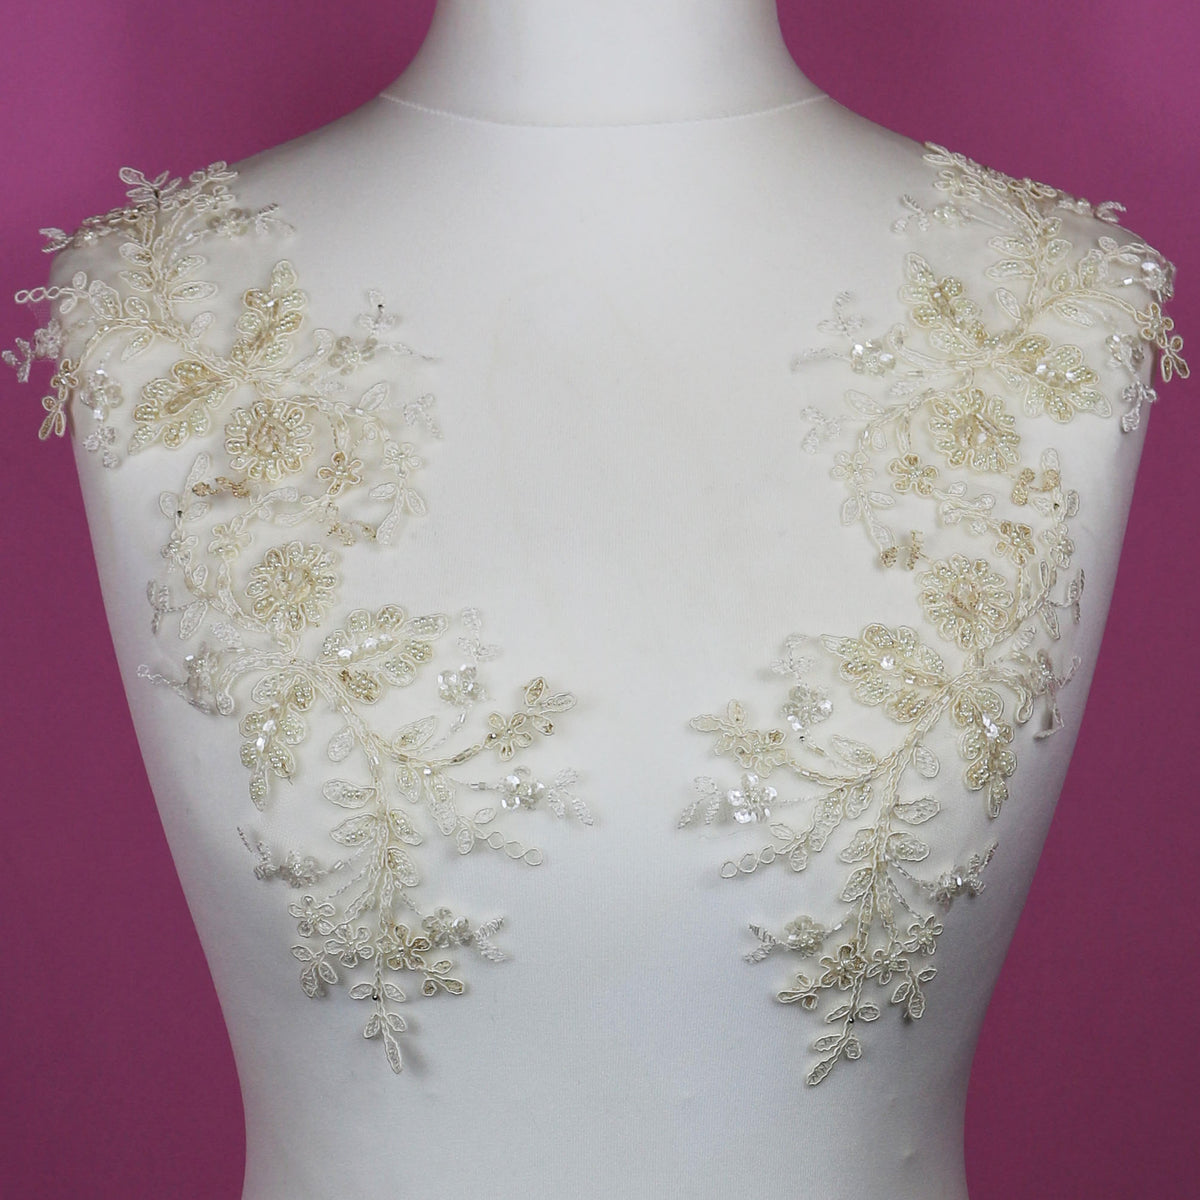 Buy 3D Ivory White Embroidery Flower Lace Fabric, Beaded Sequin Applique  Material Piece, Wedding Dress Lace Trim, DIY Mesh Bodice Online in India -  Etsy